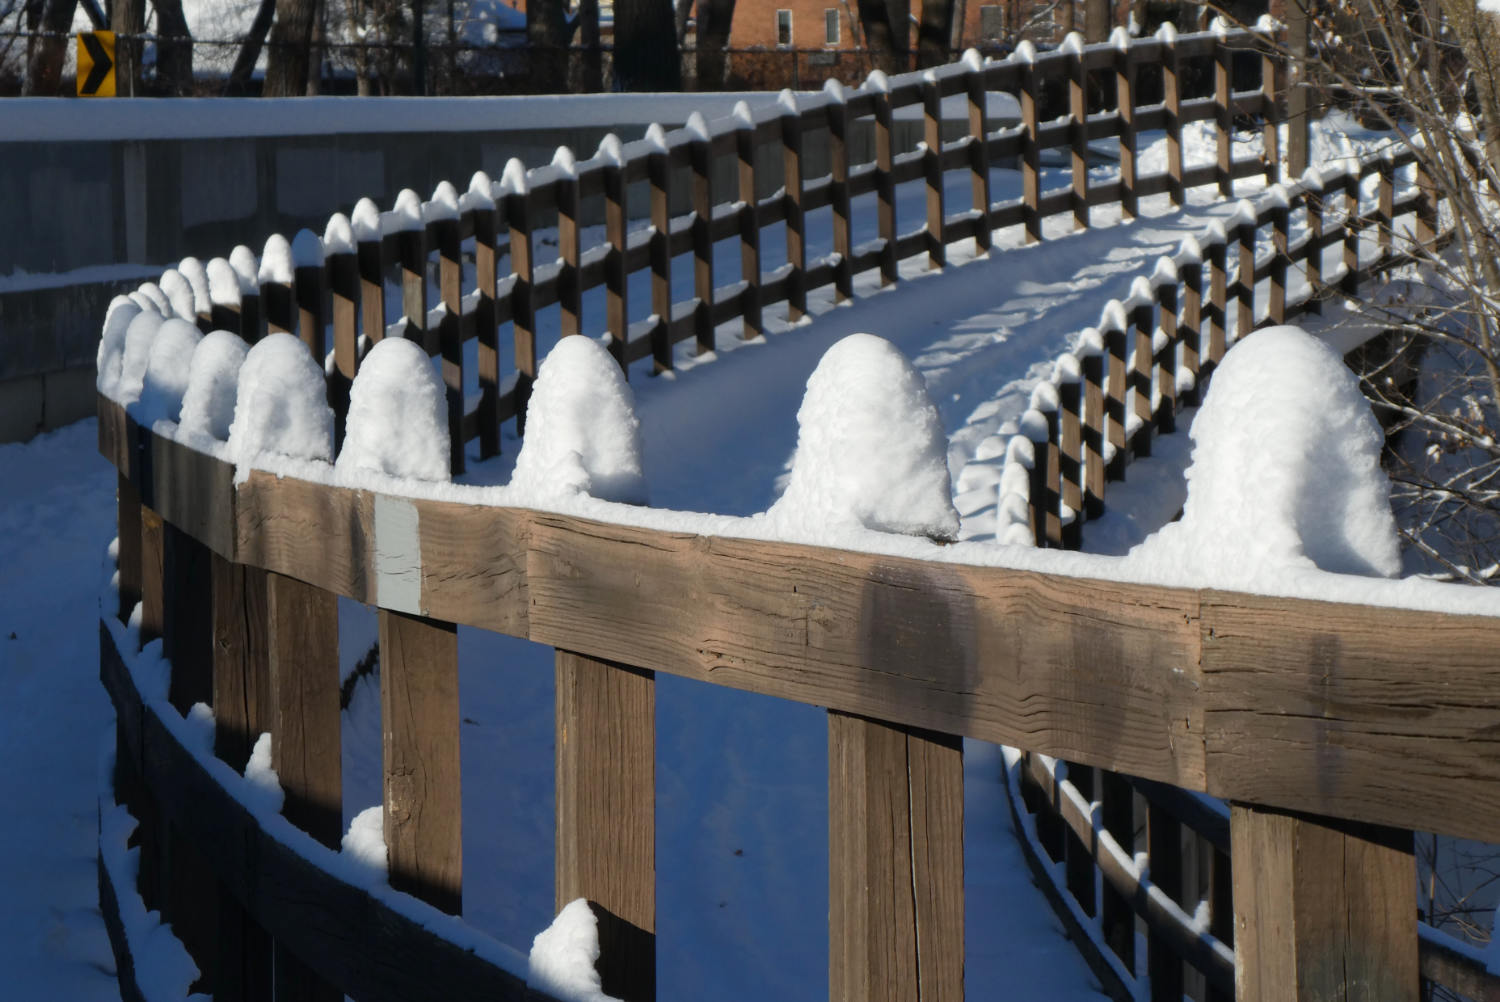 curving wooden railings with snow-capped posts on a sunny day